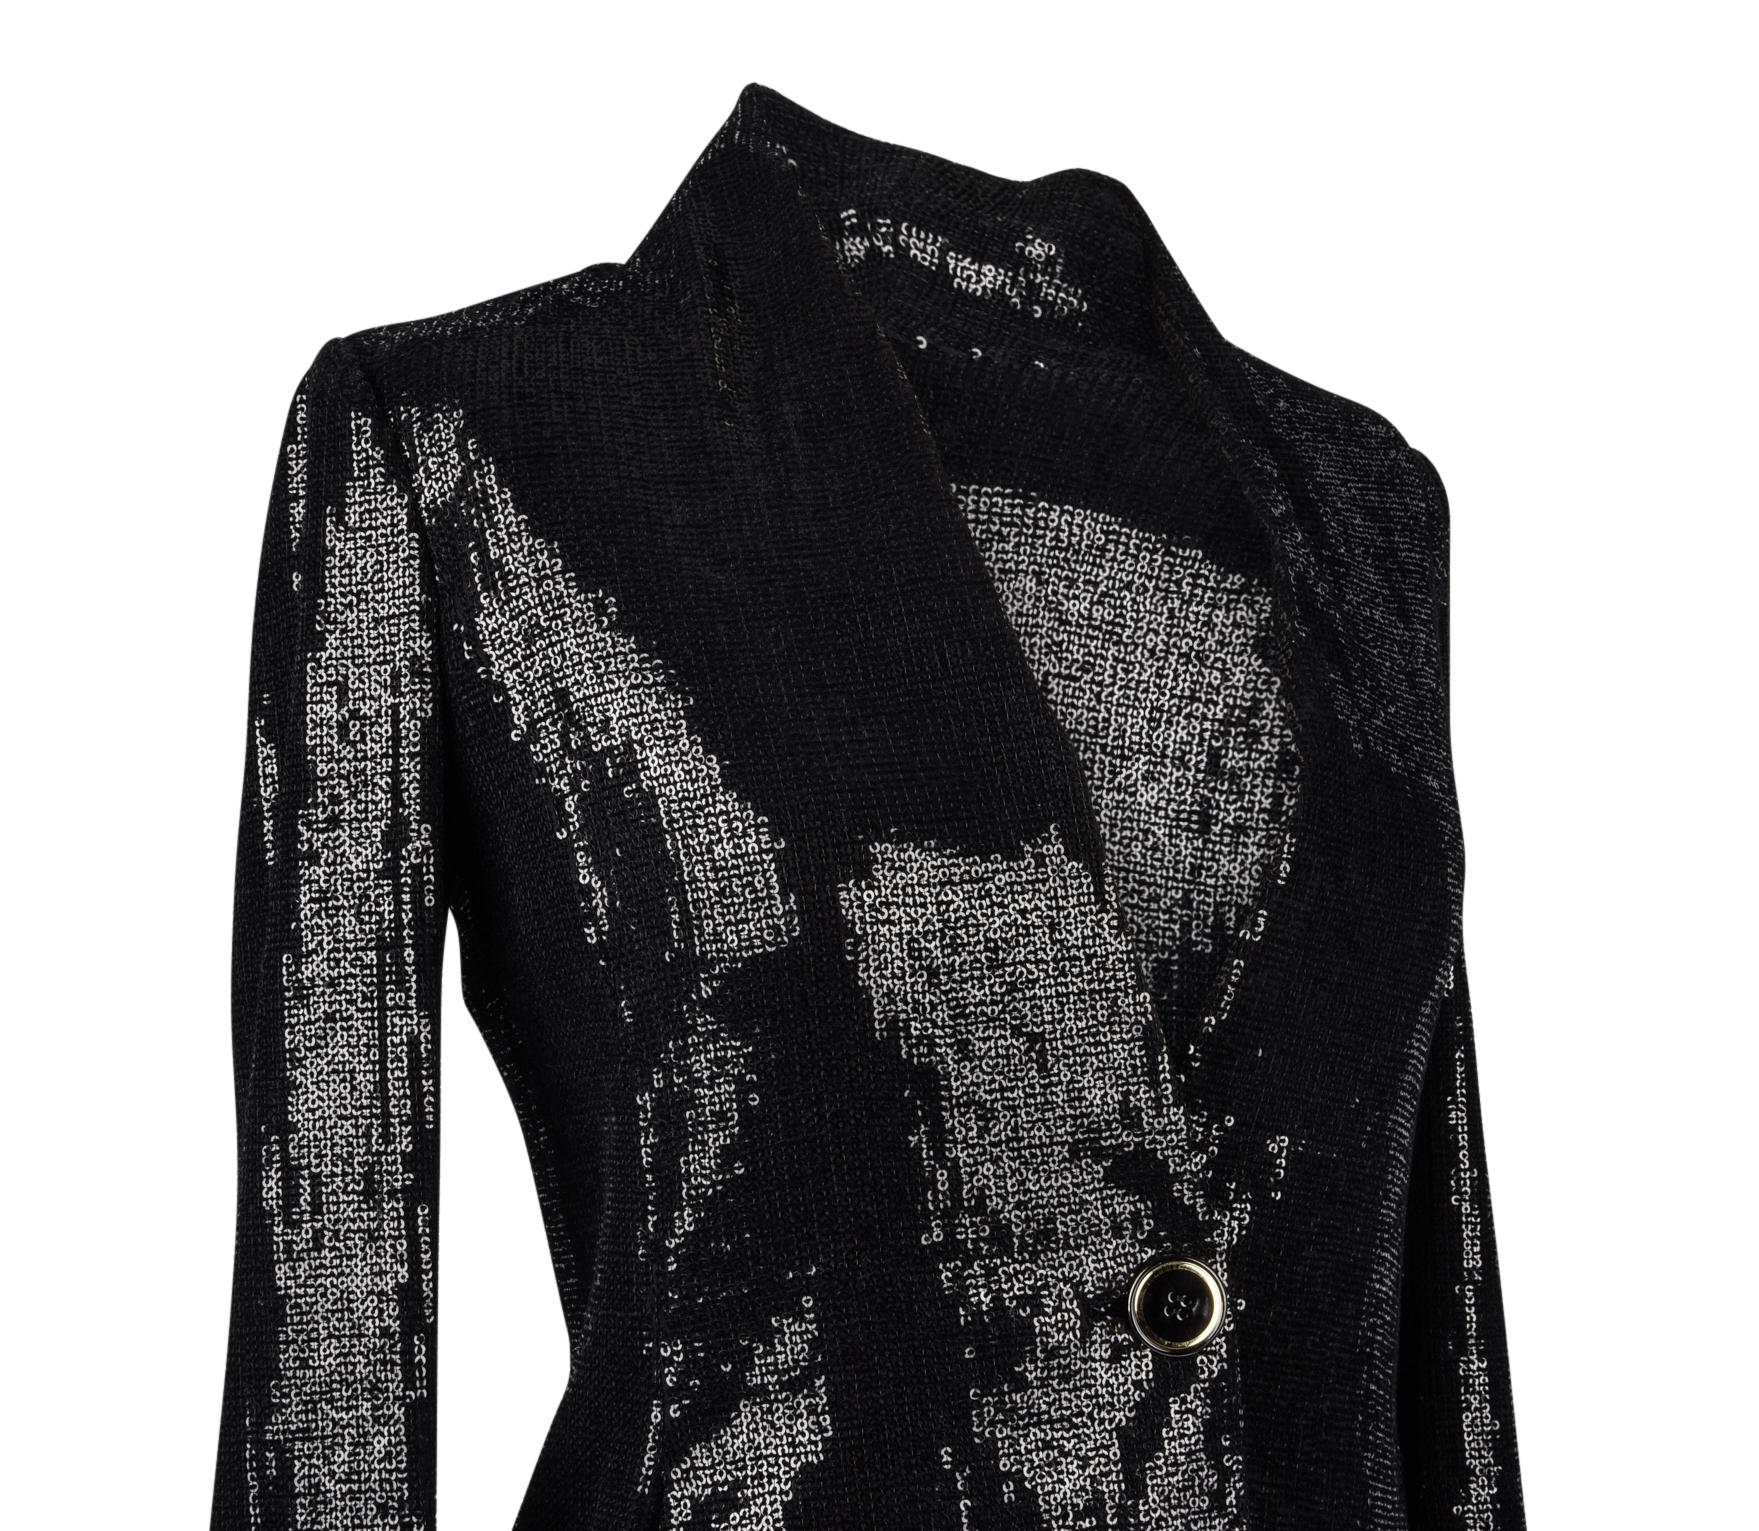 Guaranteed authentic Giorgio Armani black sequined jacket.
Beautifully shaped single breast jacket with 1 black and gold button. 
V-neck.  
Elegant simplicity. 
Jacket is lined.
NEW or NEVER WORN
final sale

SIZE 38
USA SIZE 6

TOP MEASURES:
LENGTH 